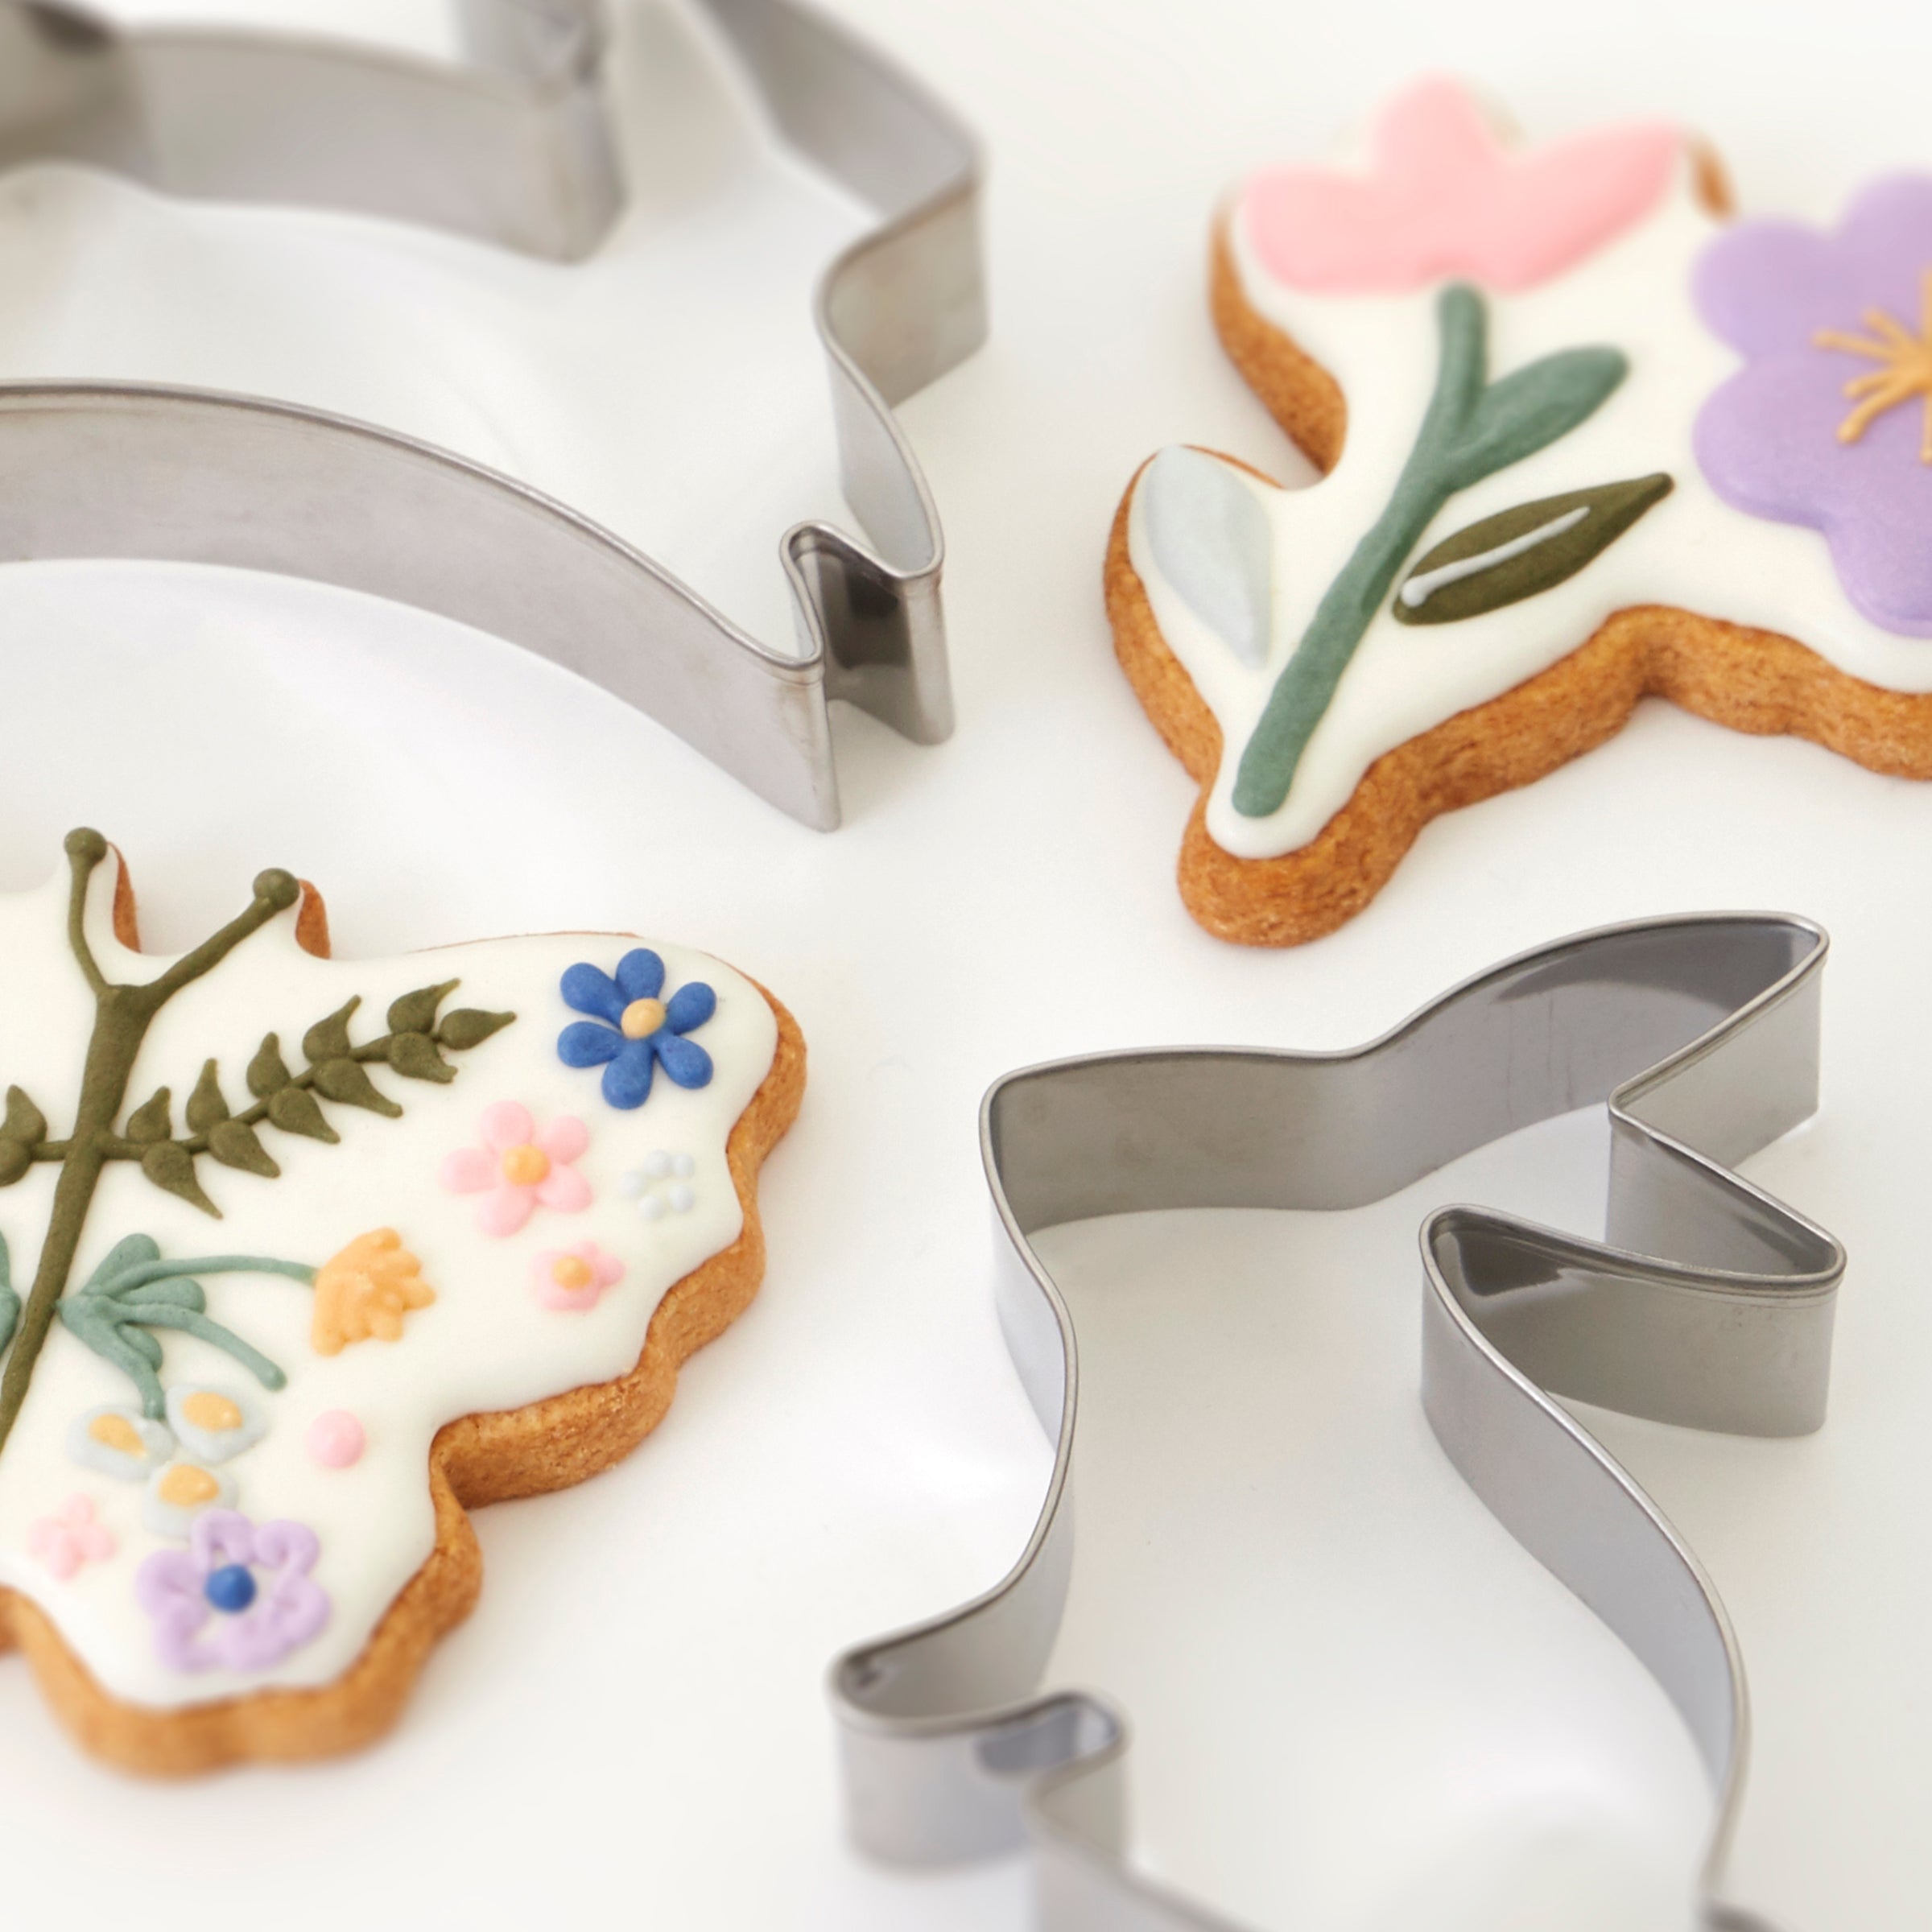 Our Easter cookie cutters are perfect as an Easter gift, and to make the most amazing Easter cookies.